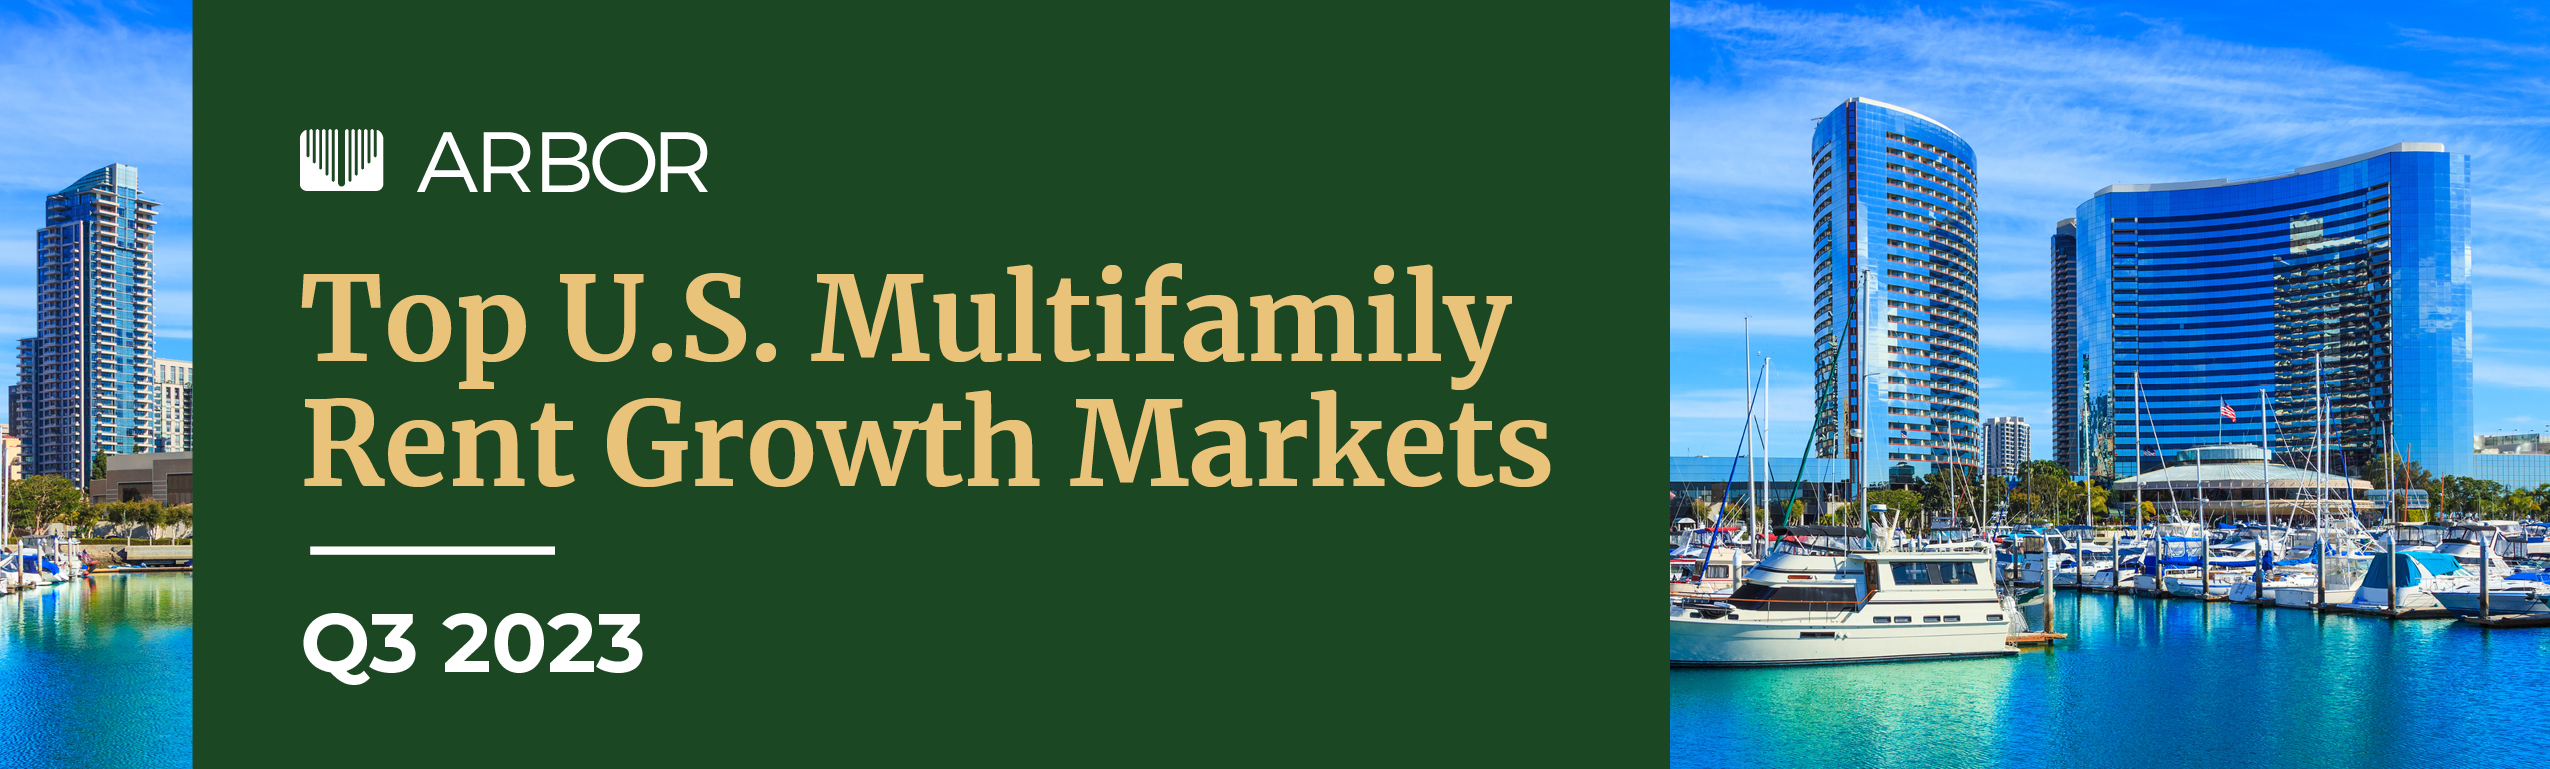 Top U.S. Multifamily Rent Growth Markets Q3 2023